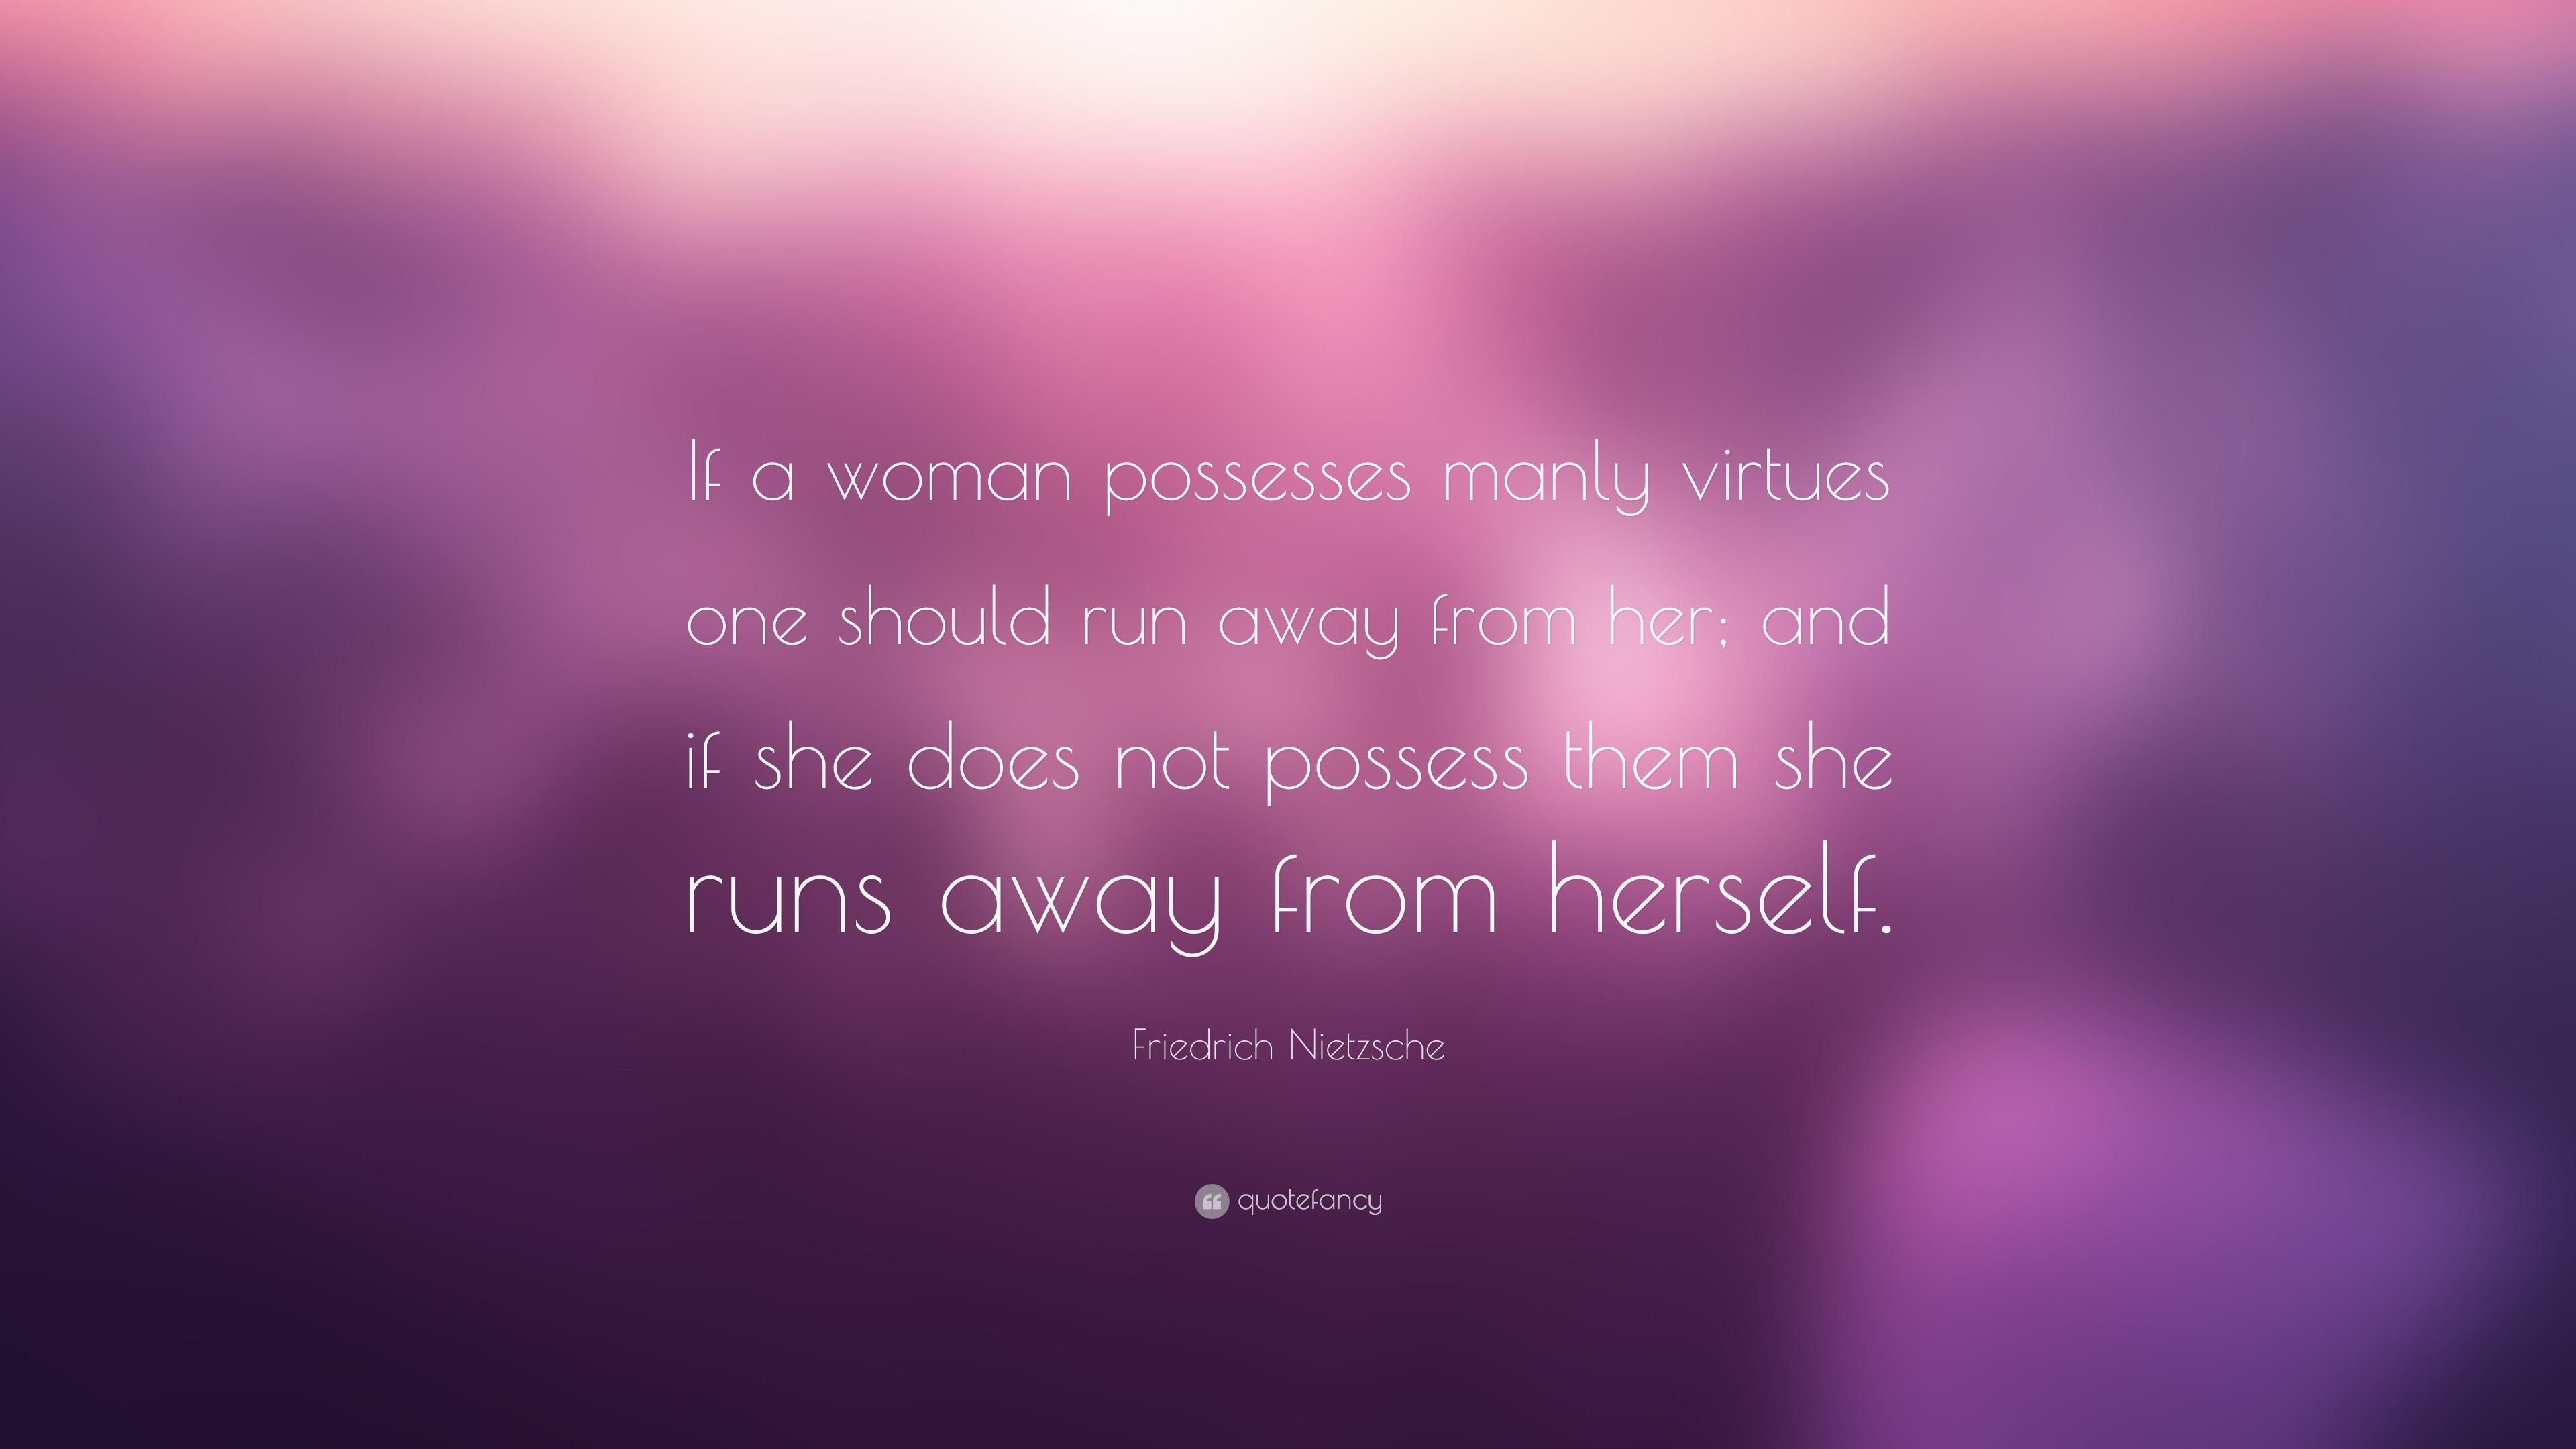 Friedrich Nietzsche Quote: “If a woman possesses manly virtues one